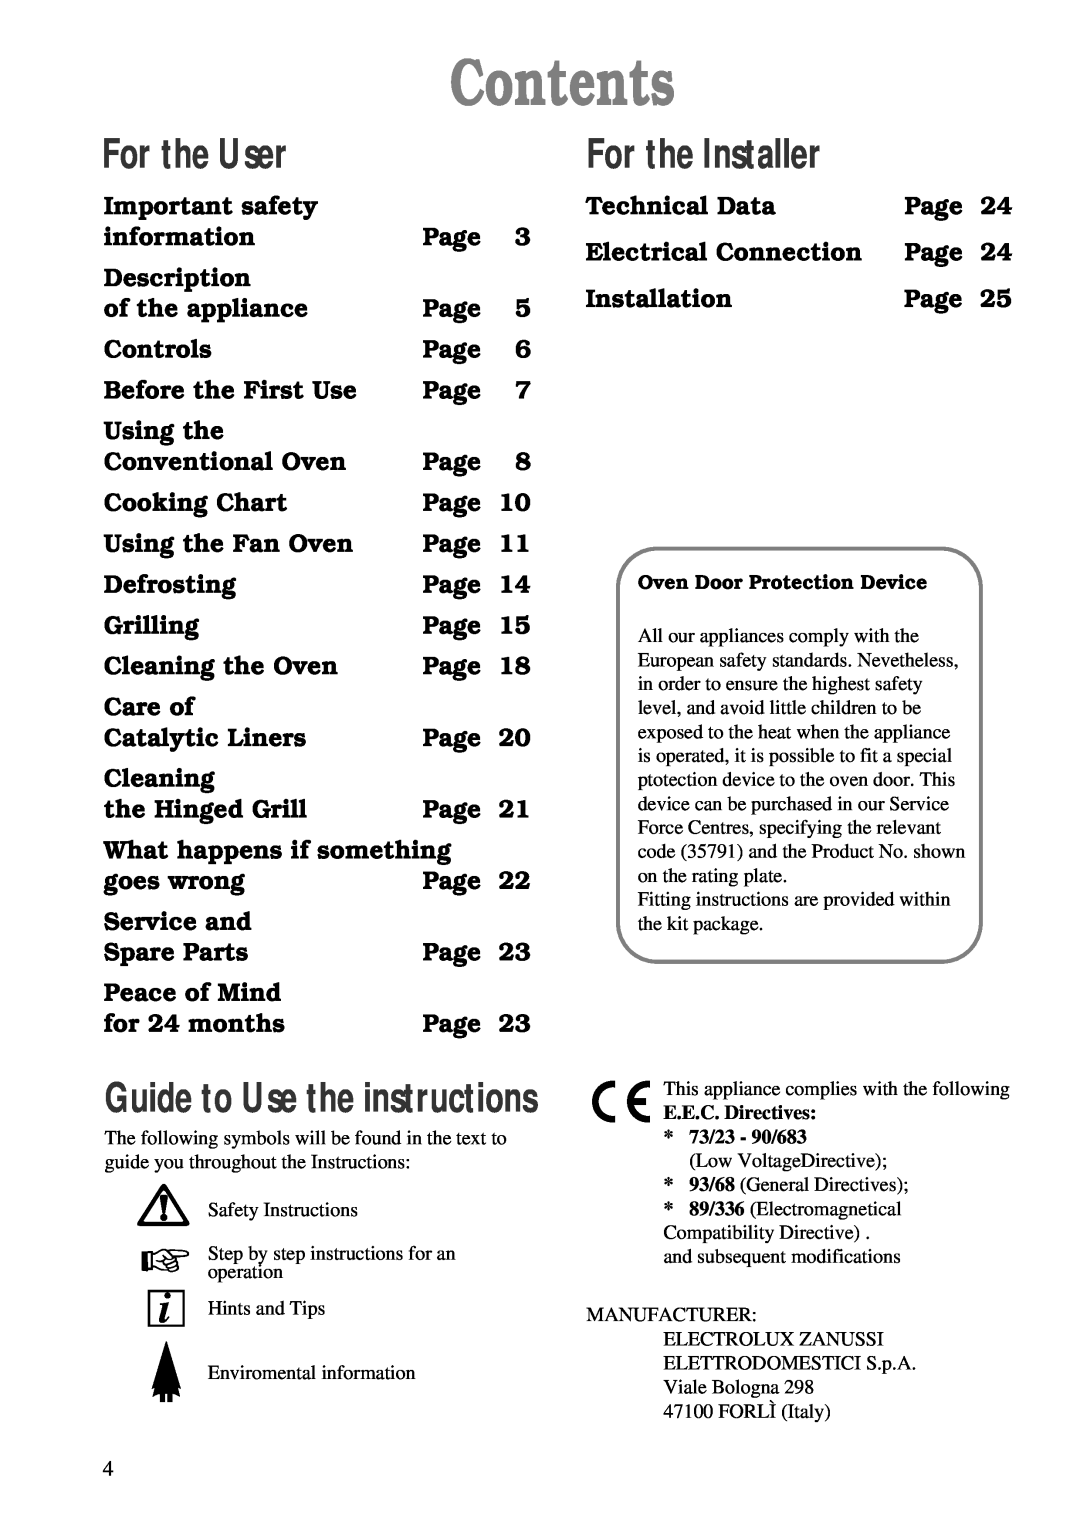 Zanussi ZBC 748 installation manual Contents, For the User, For the Installer, Guide to Use the instructions 